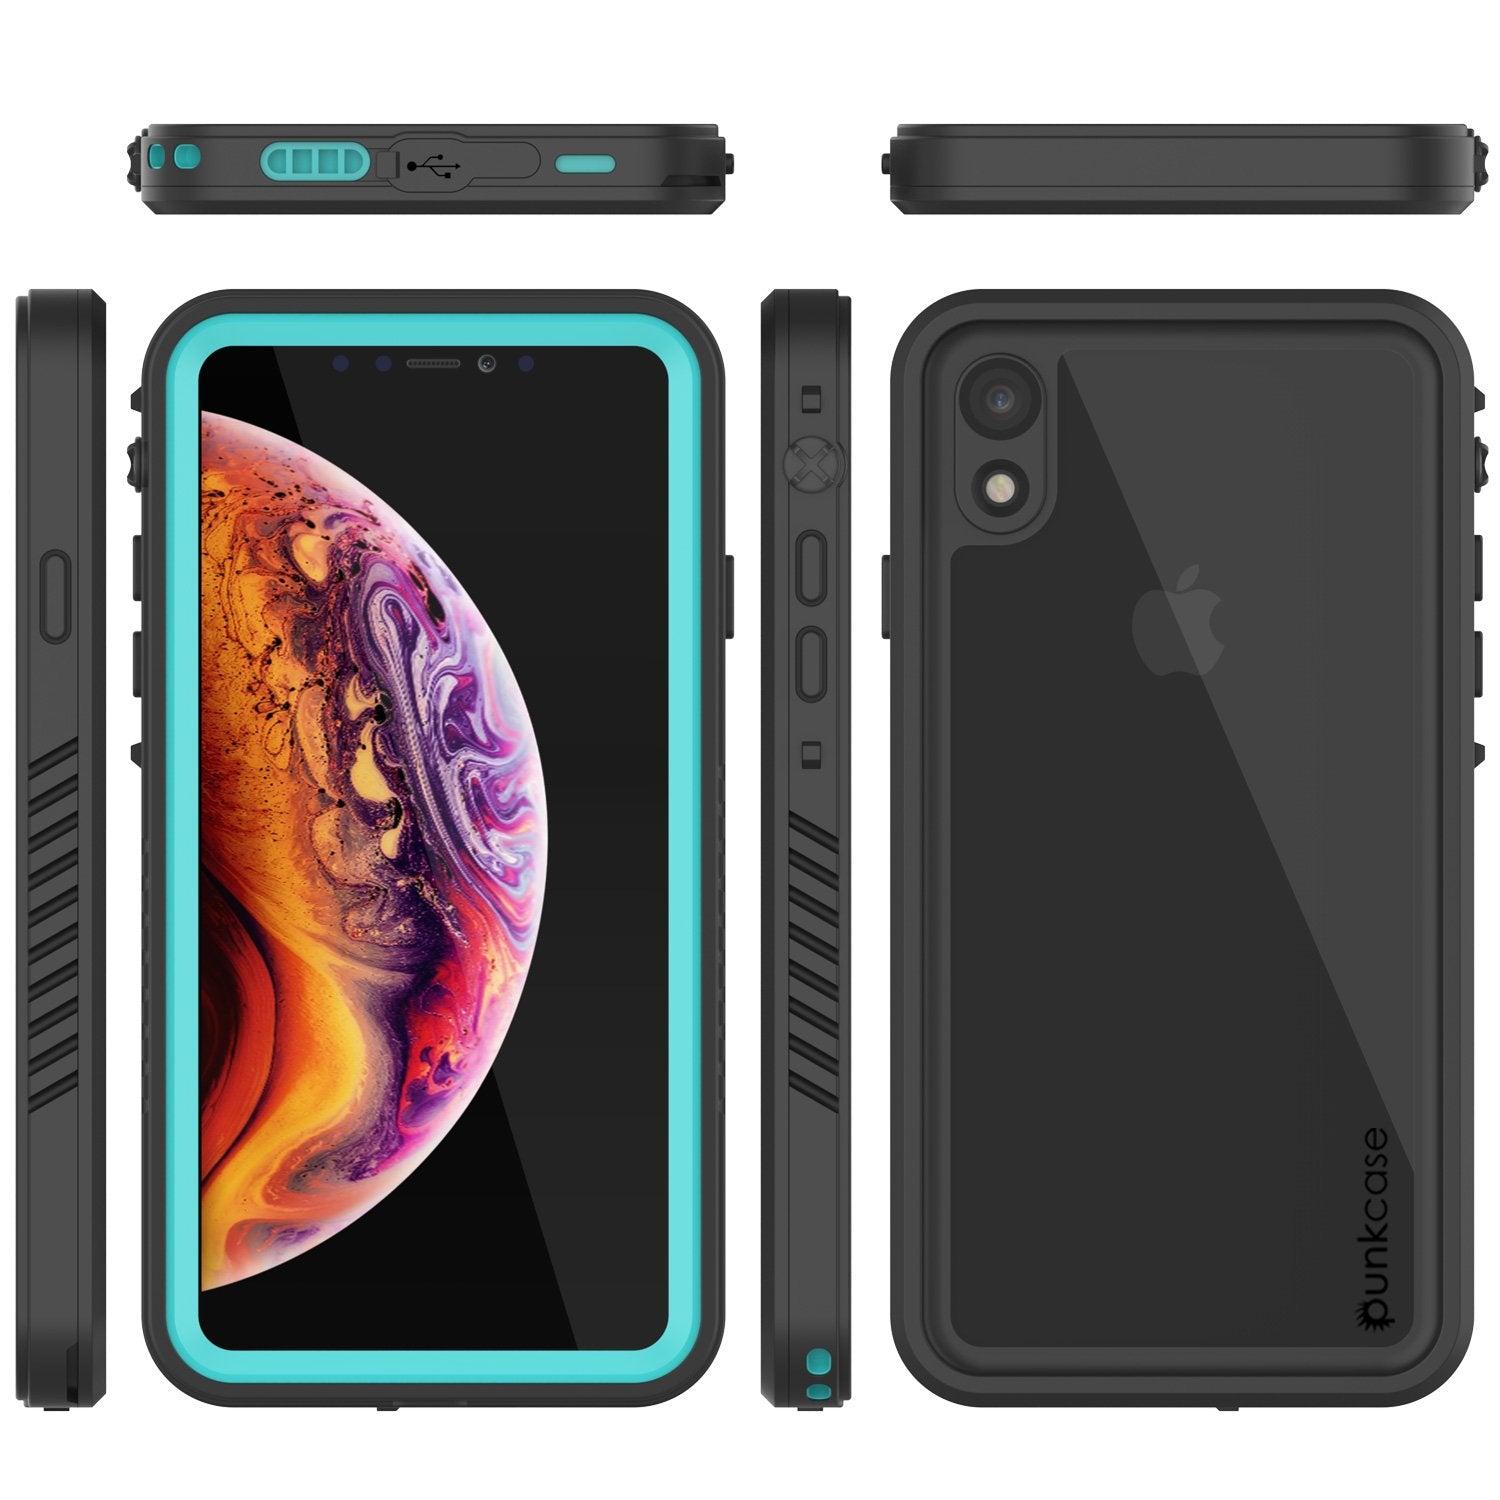 iPhone XR Waterproof Case, Punkcase [Extreme Series] Armor Cover W/ Built In Screen Protector [Teal]